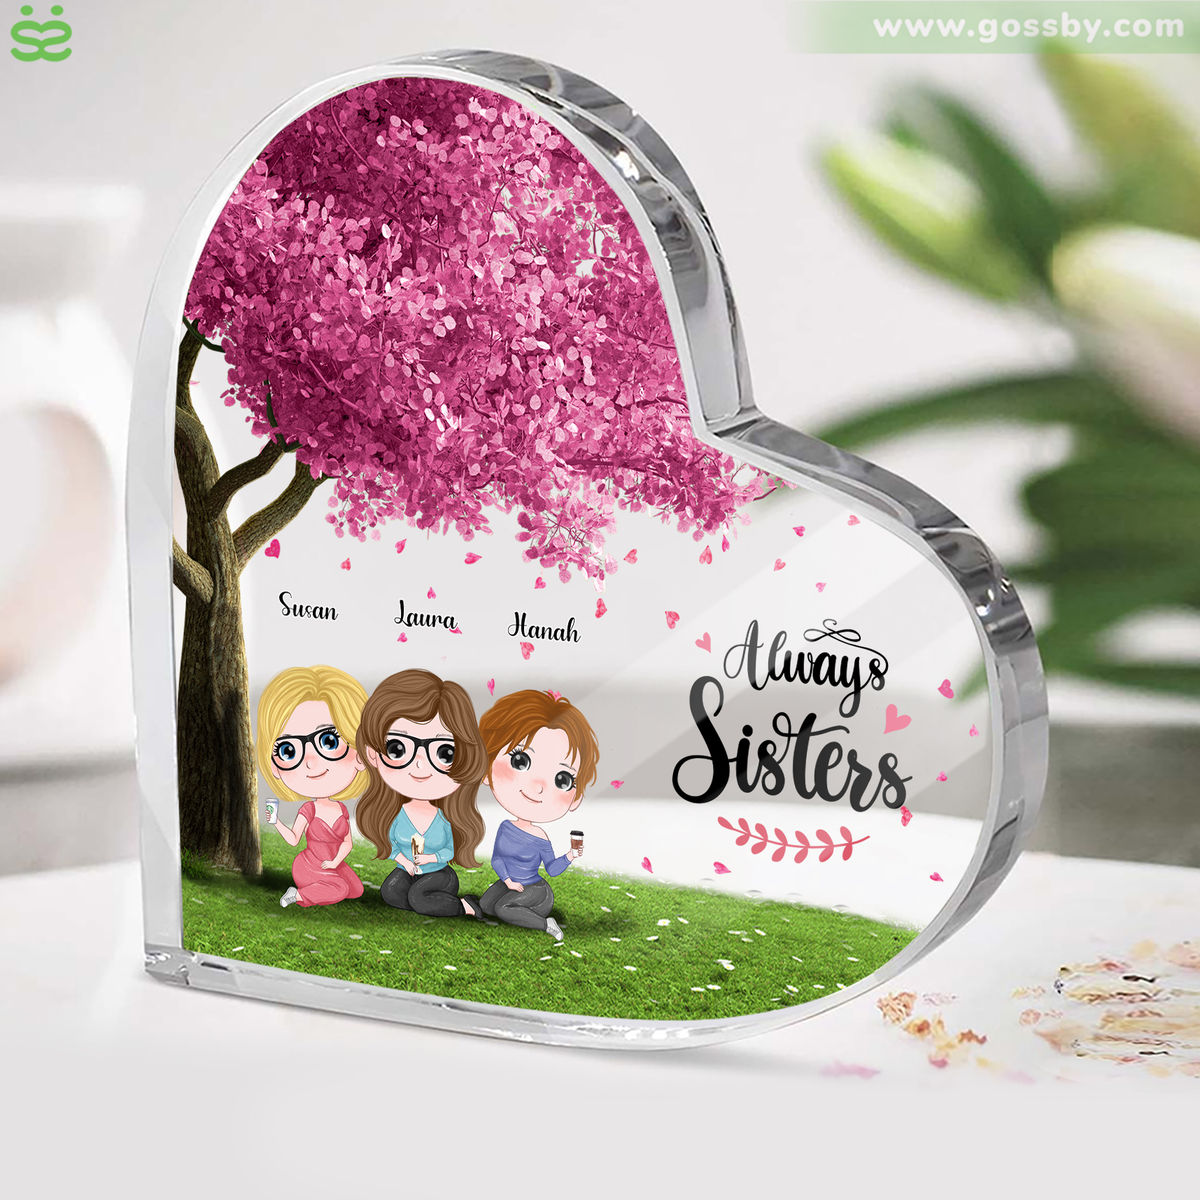 Sisters/ Best Friends Gifts - Chibi Girls - Always Sisters (Custom Heart-Shaped Acrylic Plaque)